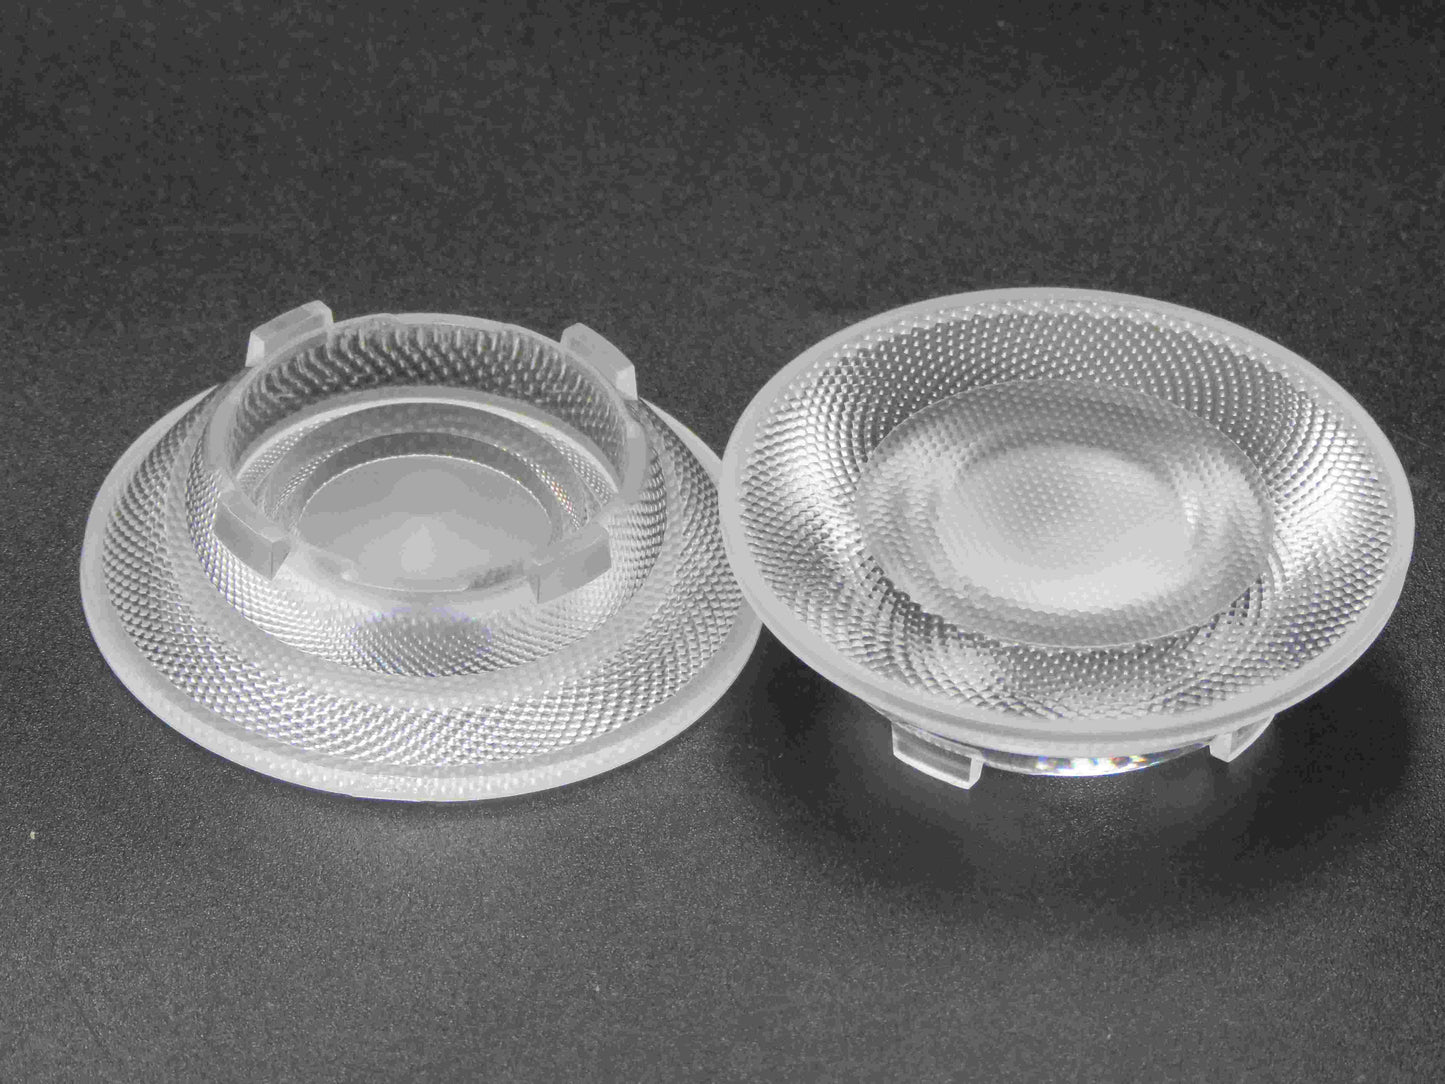 China factory produces ultra-thin anti-glare lens downlight dimmable spotlight lens embedded COB lens